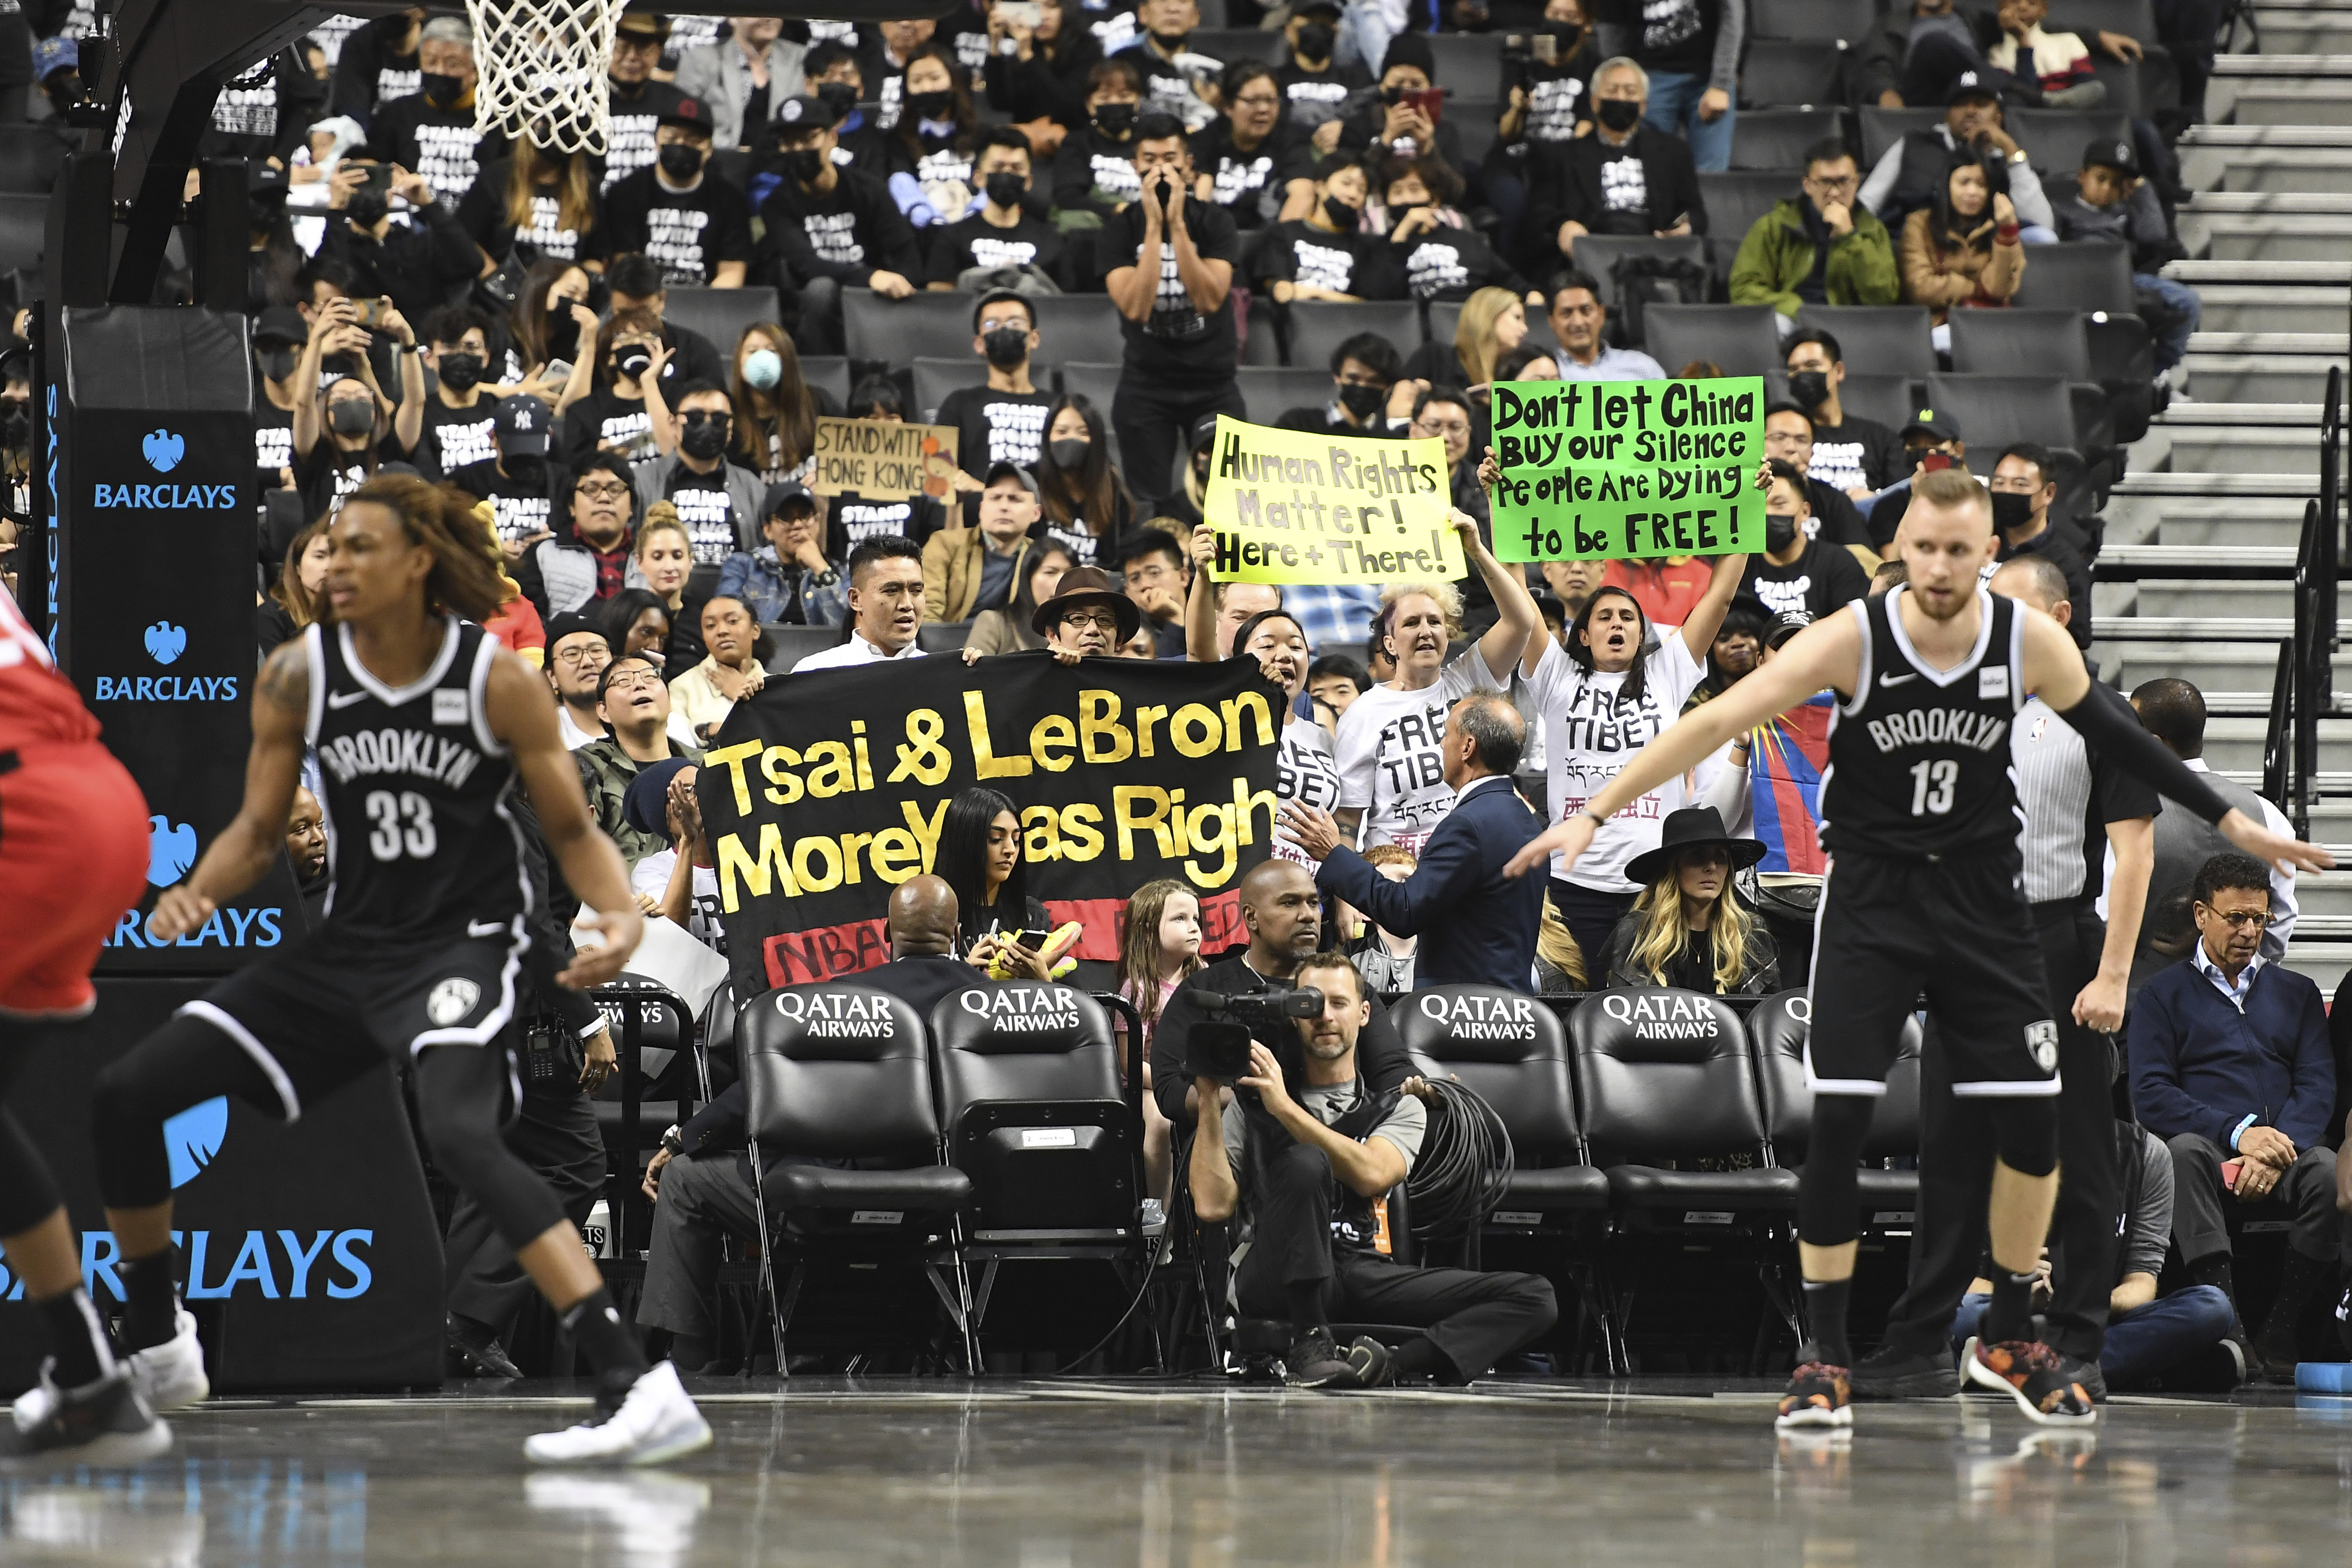 Fans support Hong Kong, Tibet at Nets' 1st game since China